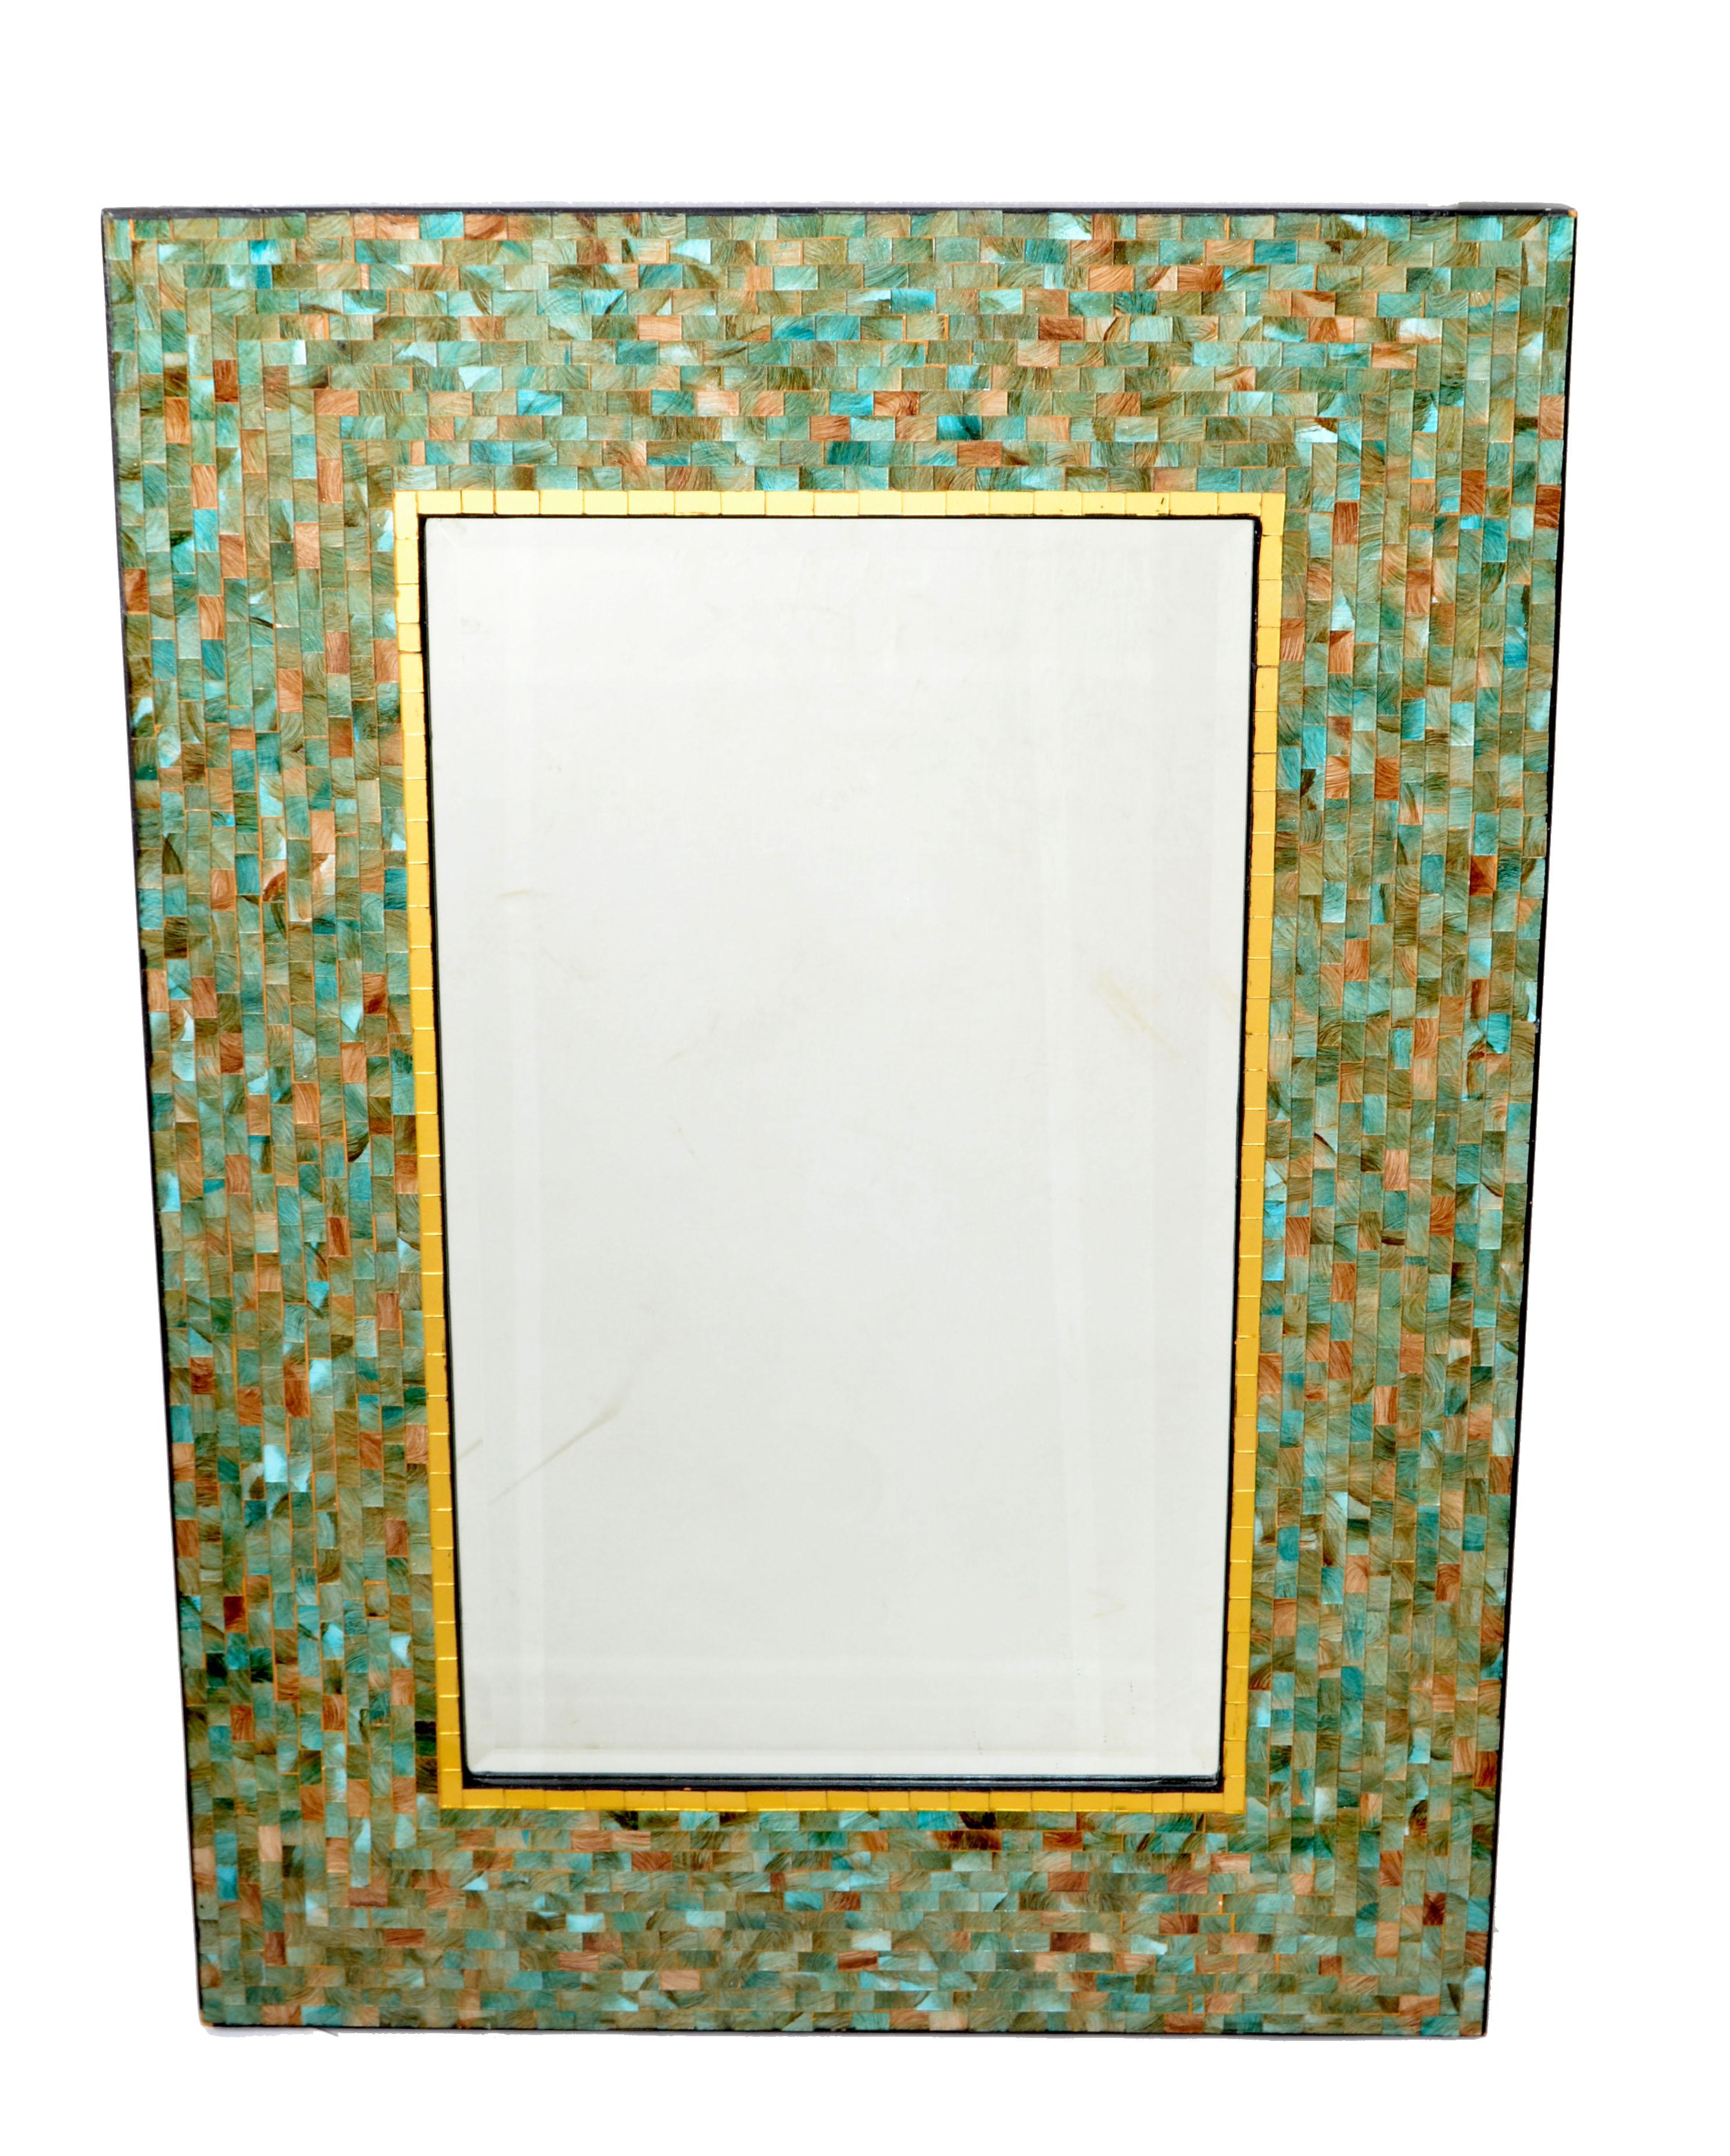 Mid-Century Modern American rectangle tessellated Wall Mirror in different shades of Green, Bronze & Hues of Gold.
The Backing is made out of solid wood for secure Hanging.
The mirror glass is beveled. 
Mirror size is 17 x 29 inches.